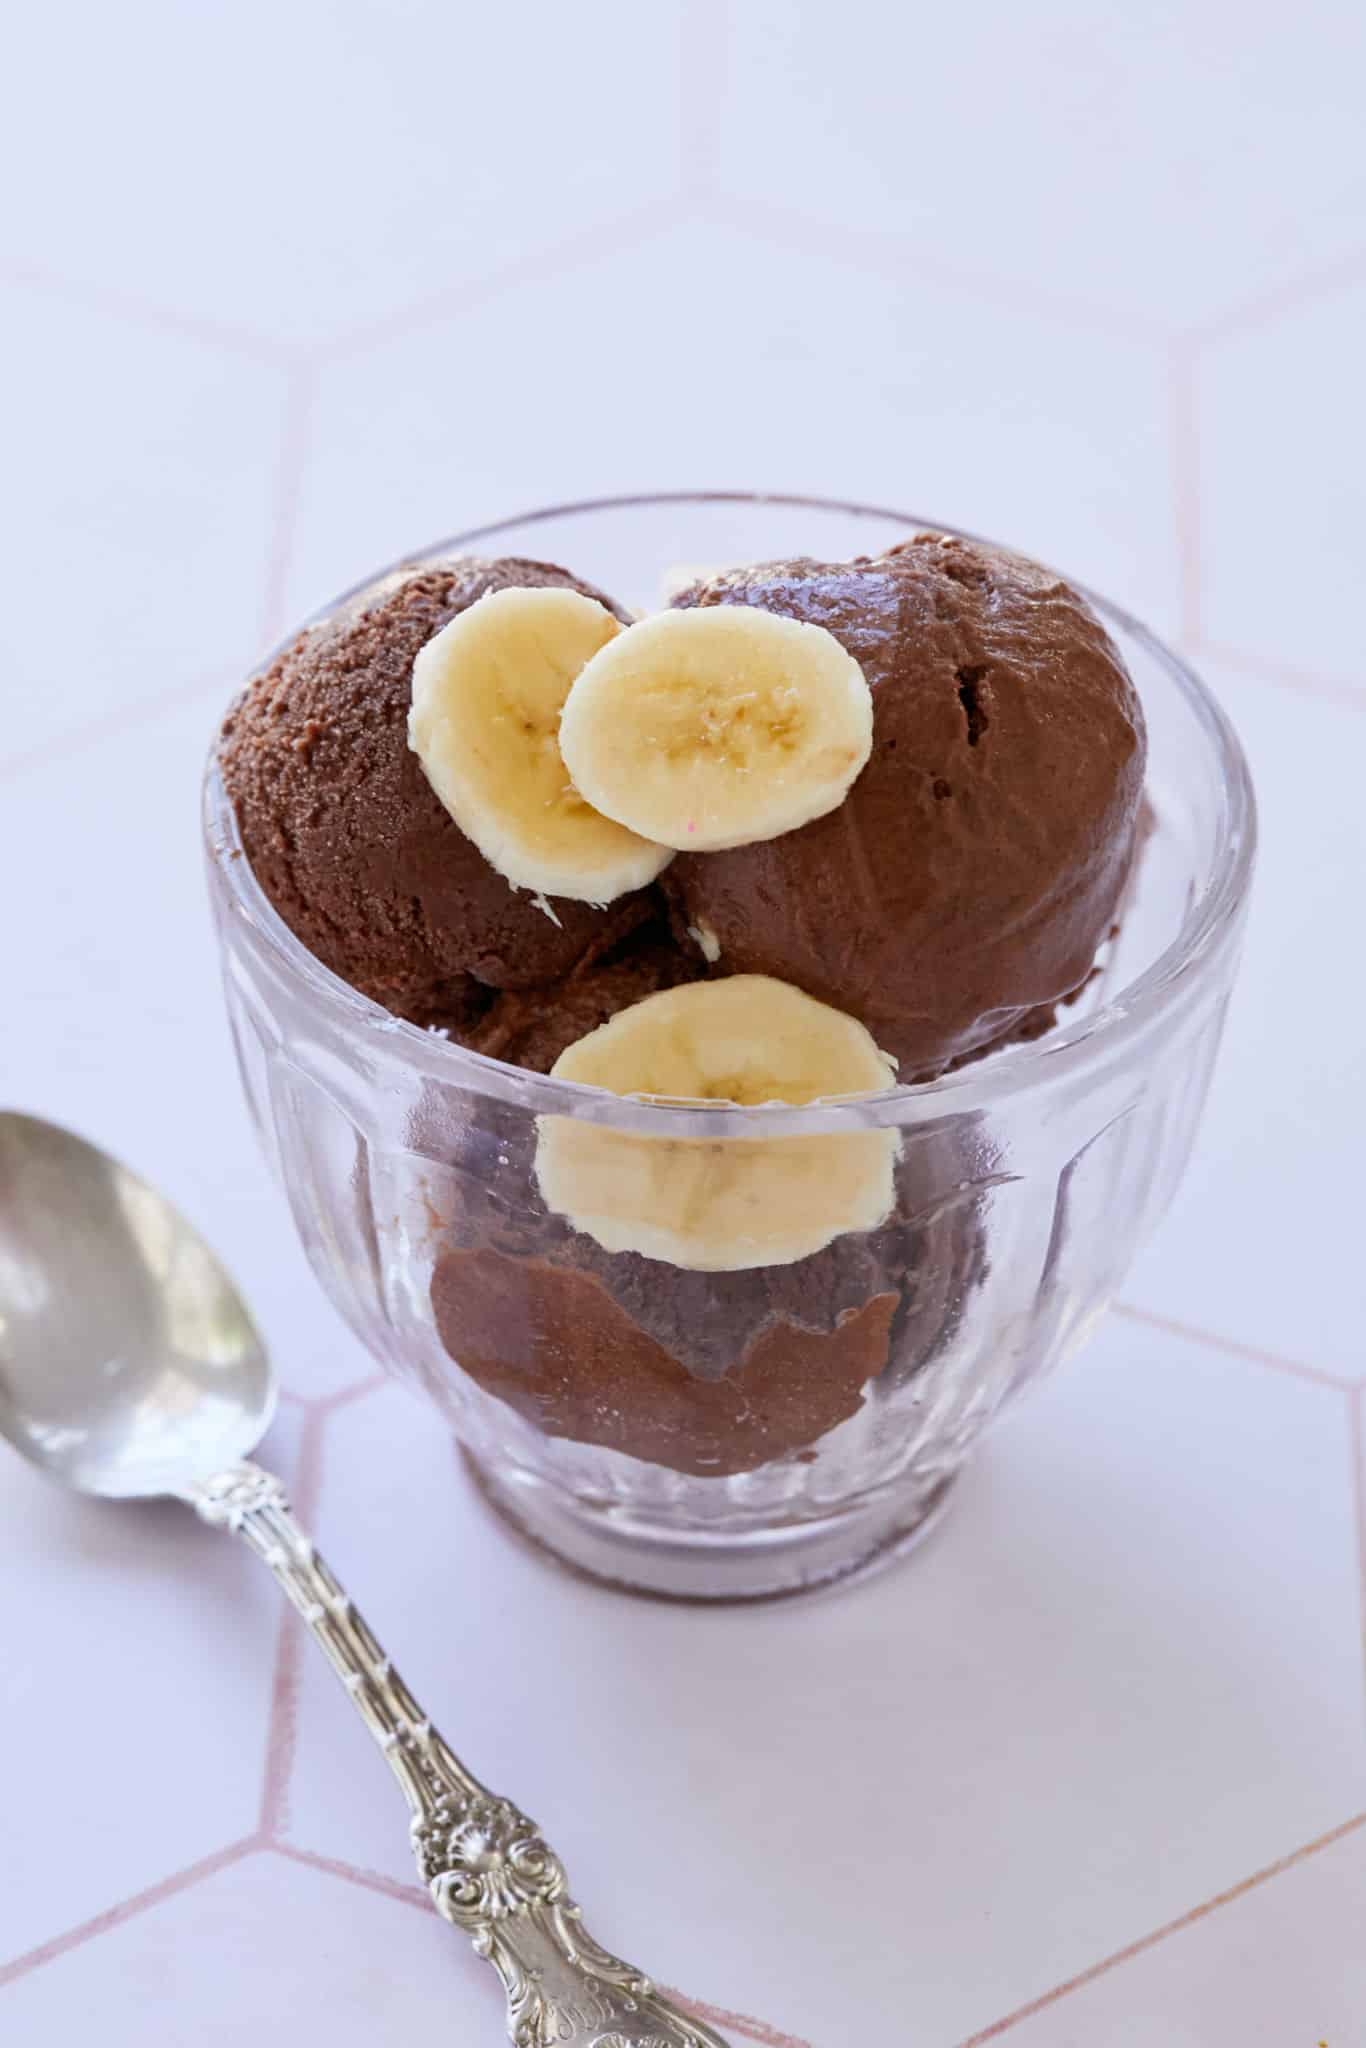 Fresh bananas top healthy chocolate ice cream, made with frozen bananas and dates.